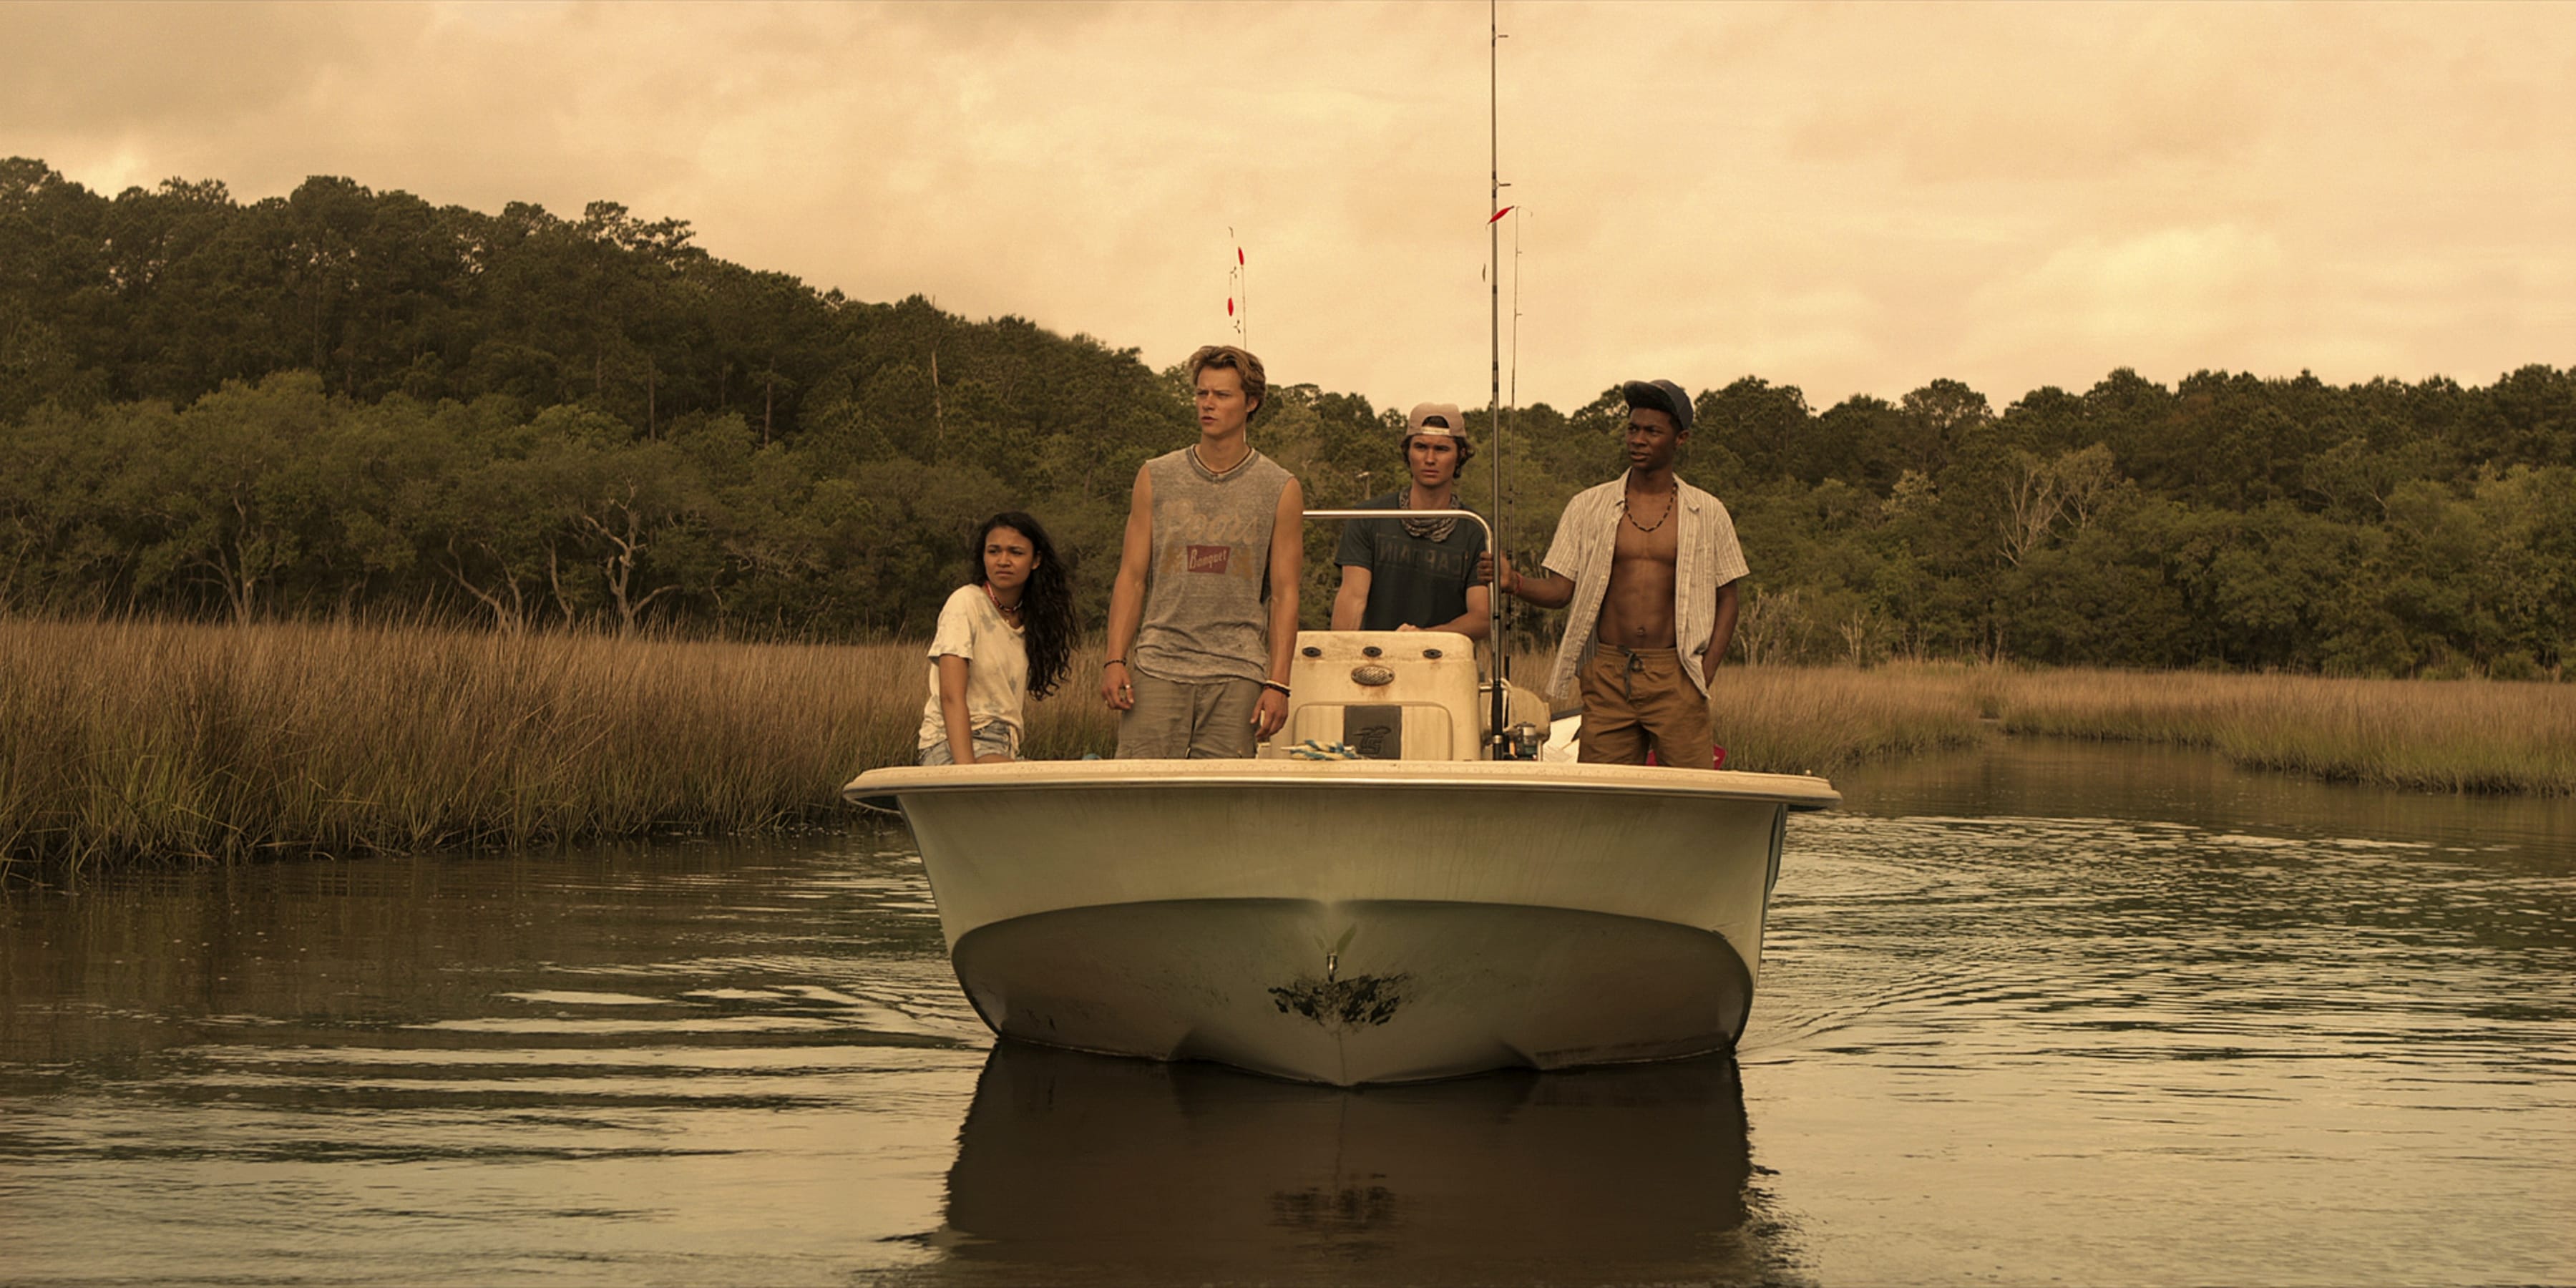 Outer Banks” Season 2: Plot Points, New Photos, and More